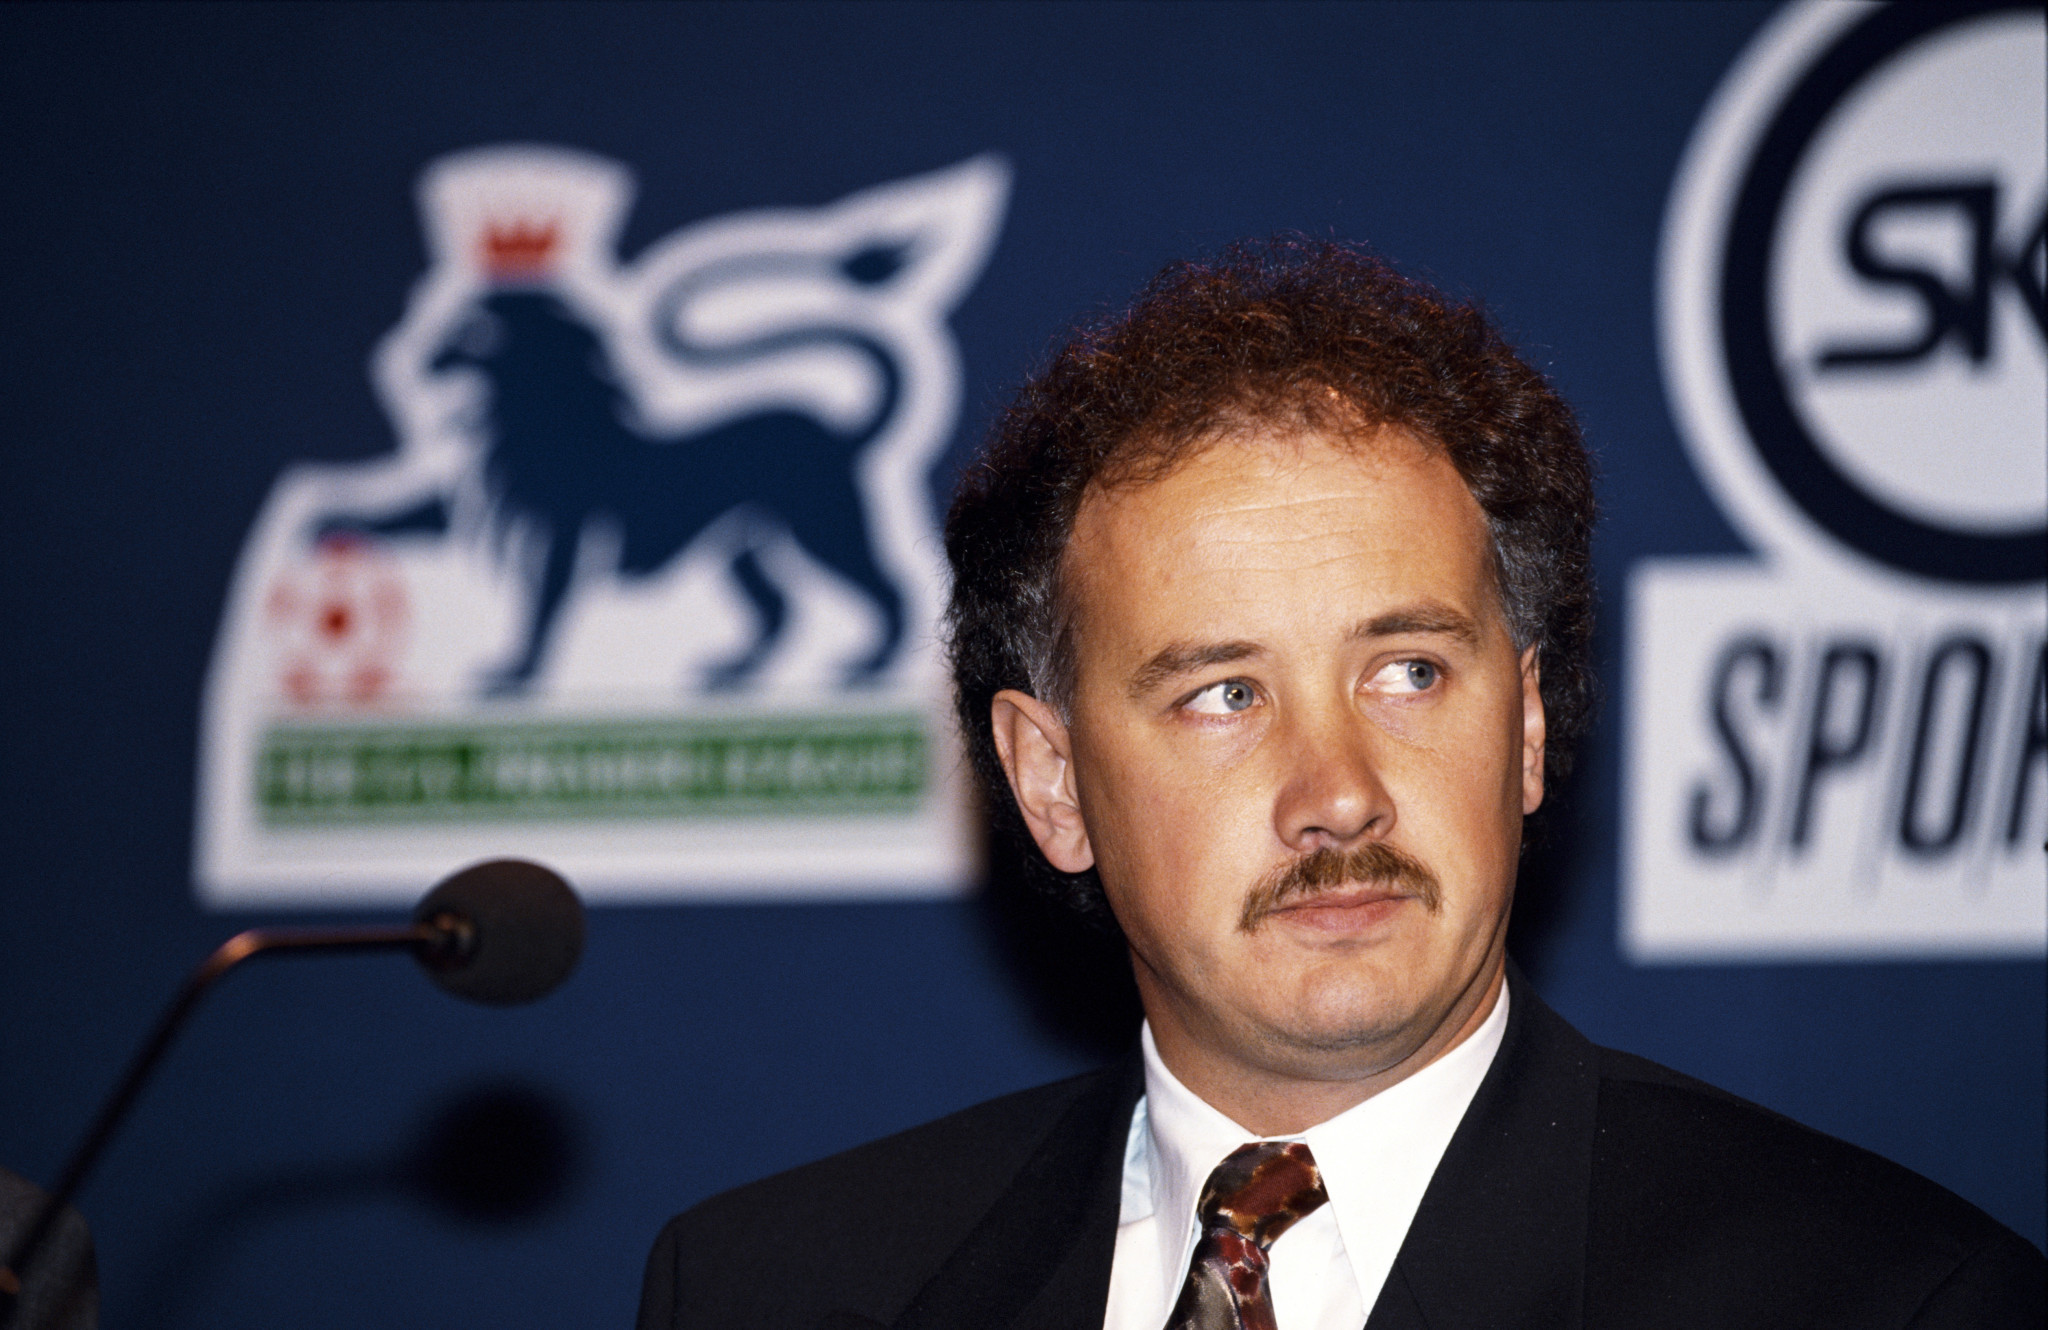 Rick Parry was the first FA Premier League chief executive ©Getty Images